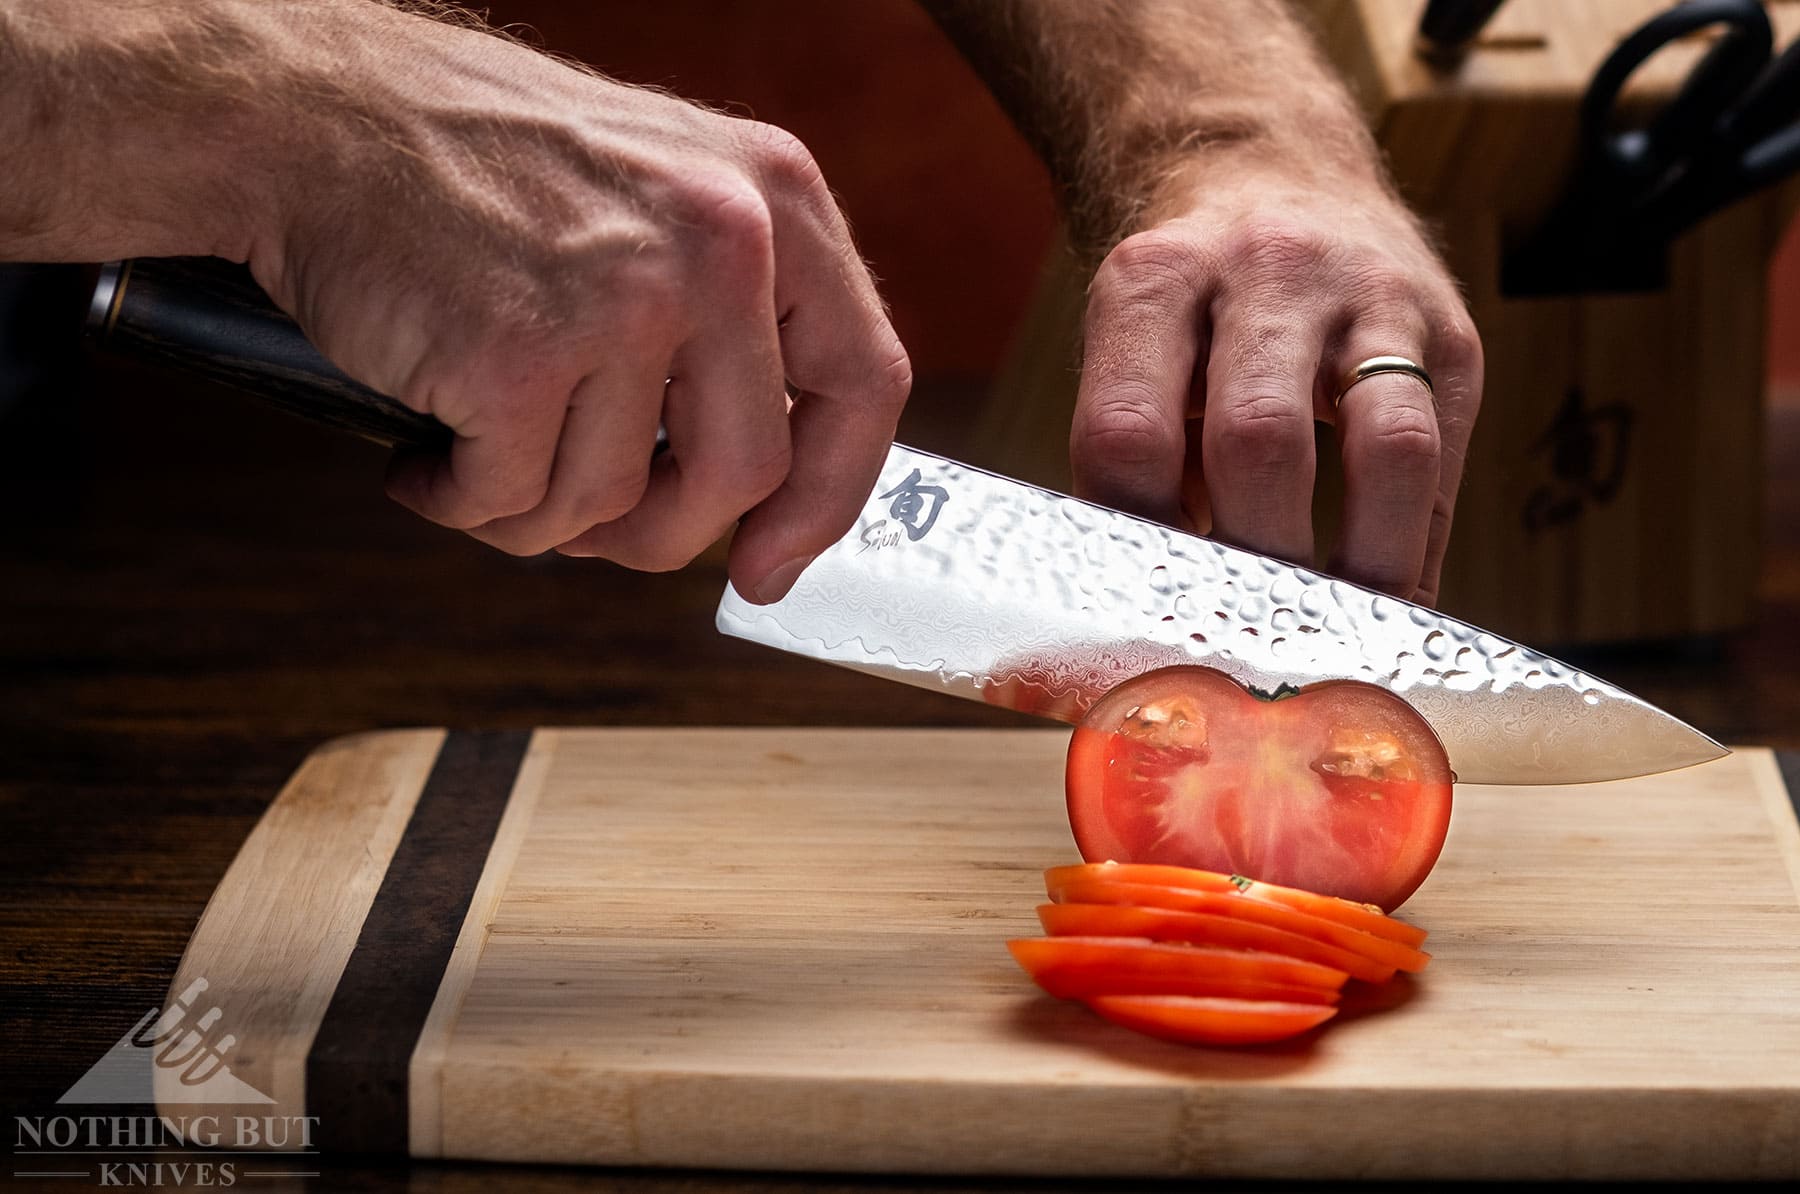 The Shun Premier chef knife being used to slice a tomato on a wood cutting board in front of the rest of knife set.